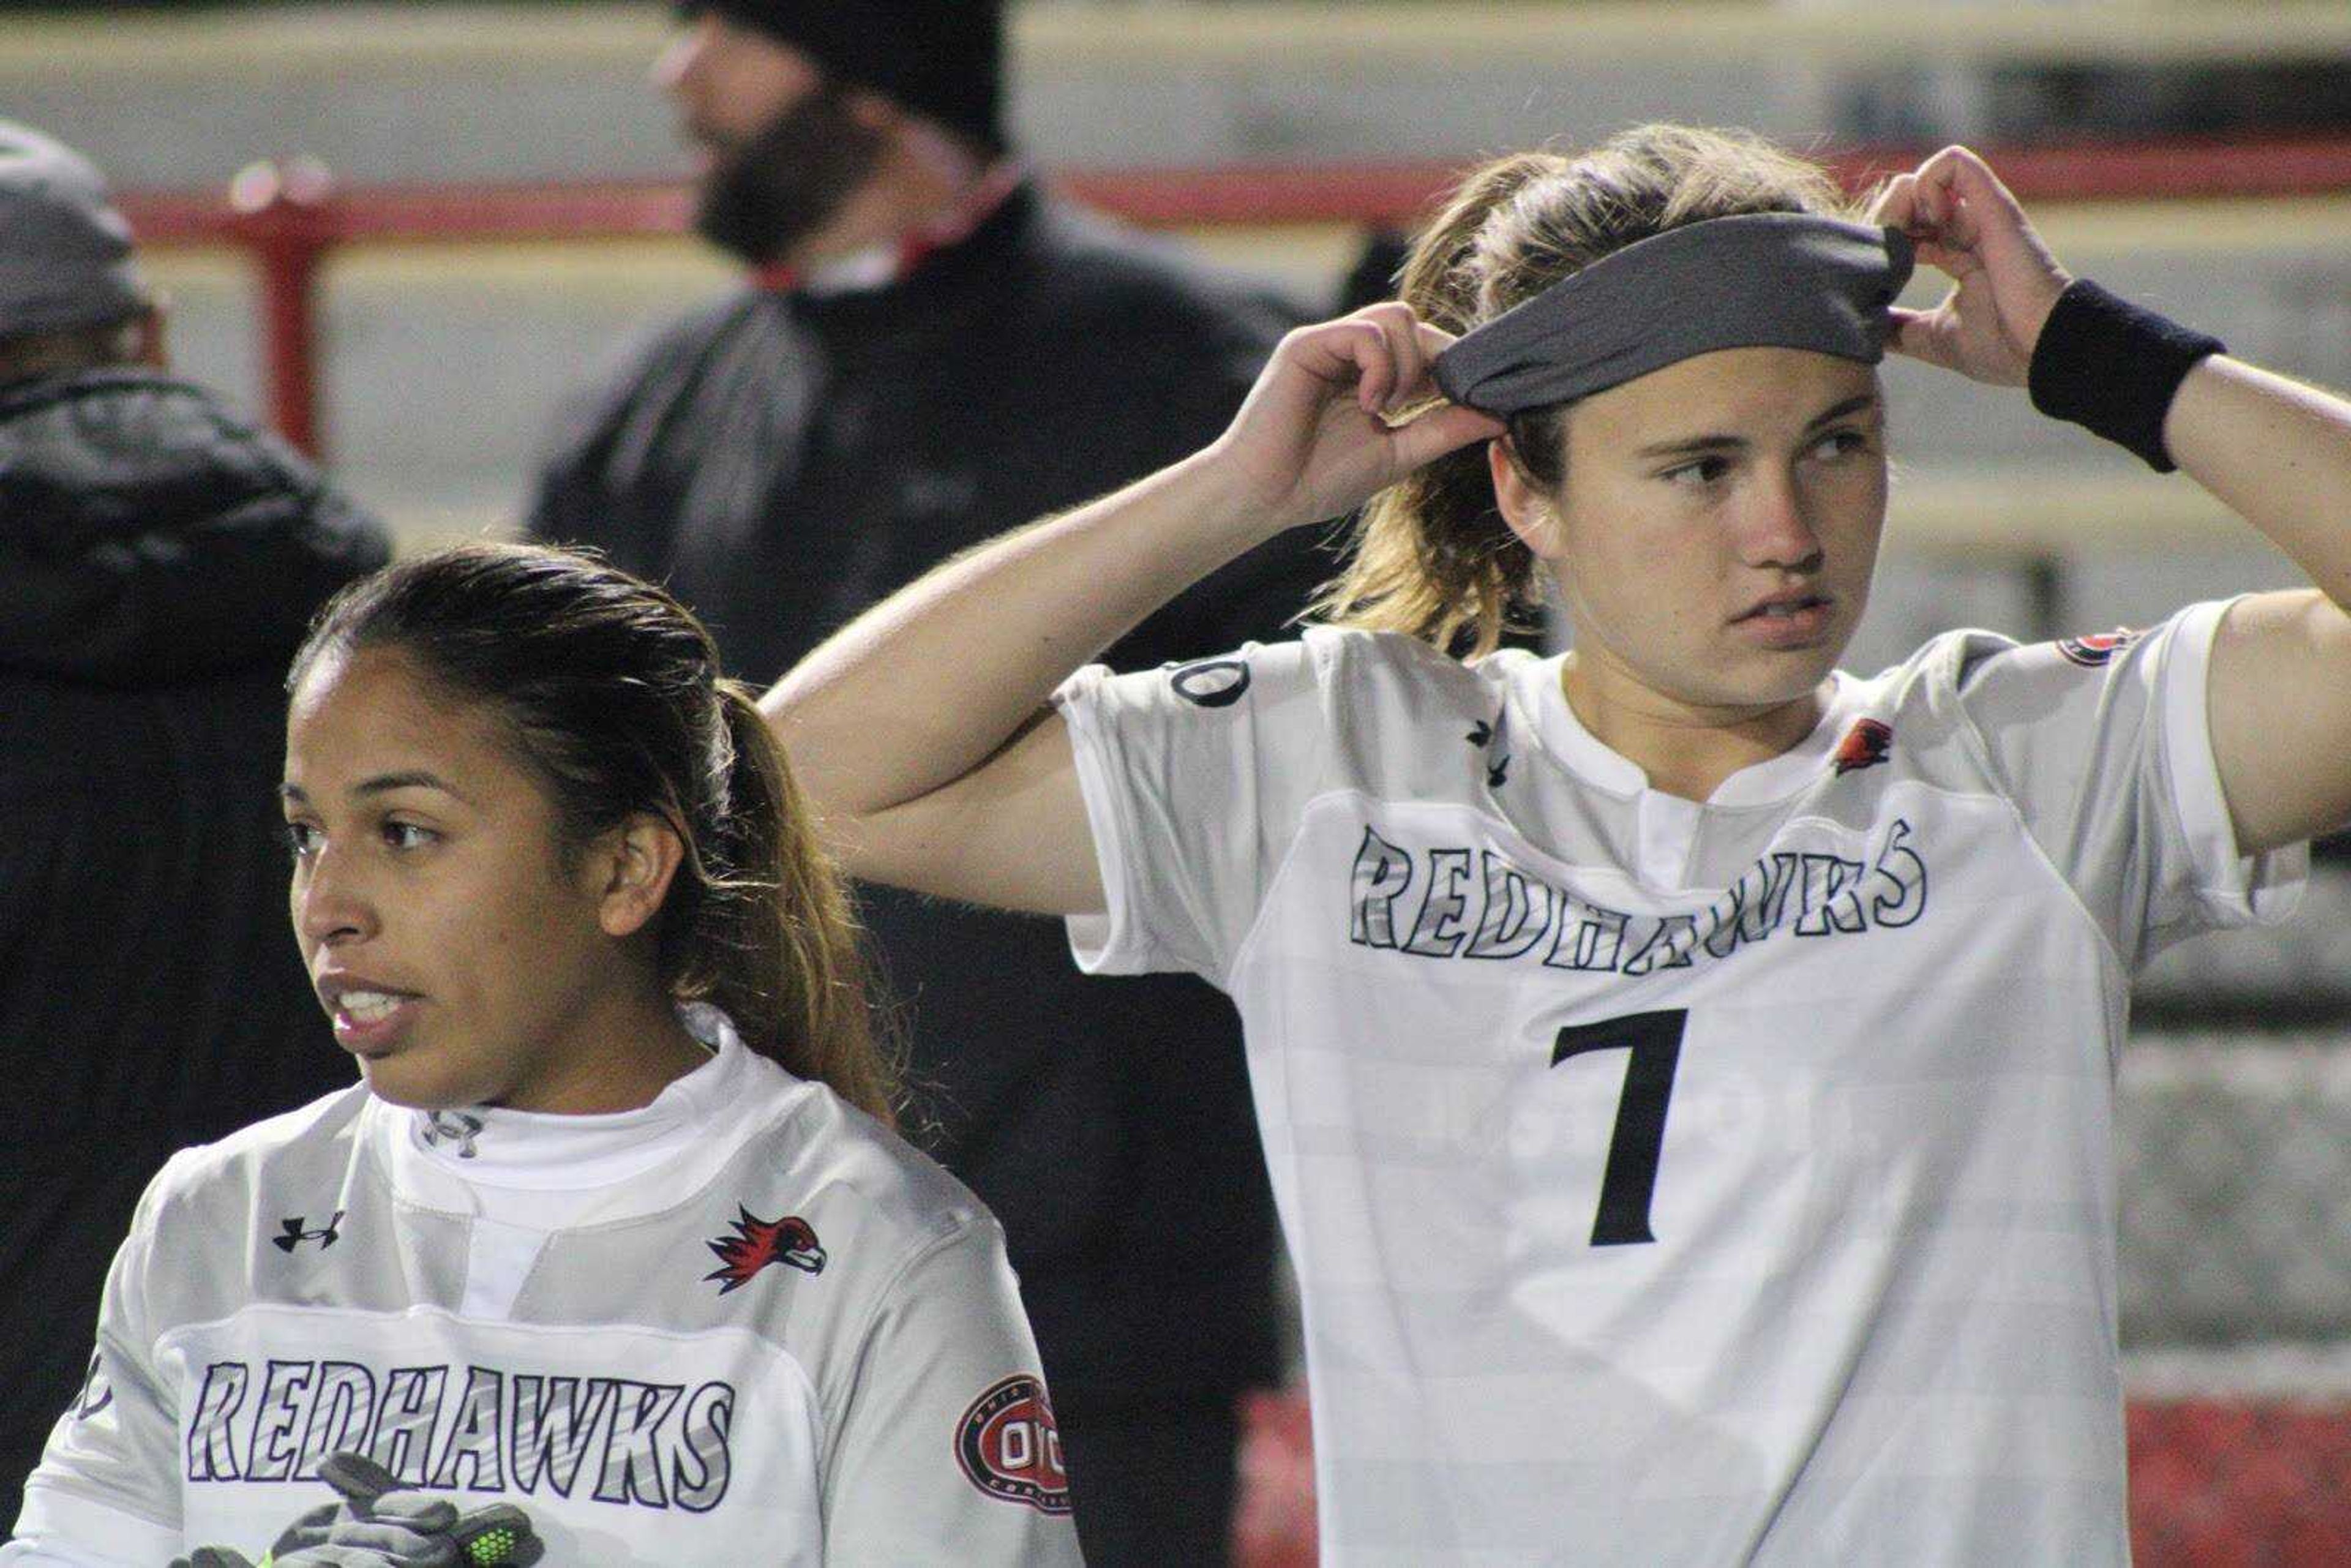 Senior midfielder Esmie Gonzales and freshman forward Hailey Block prepare for the start of the second half against SIUE on Nov. 8 at Houck Field.